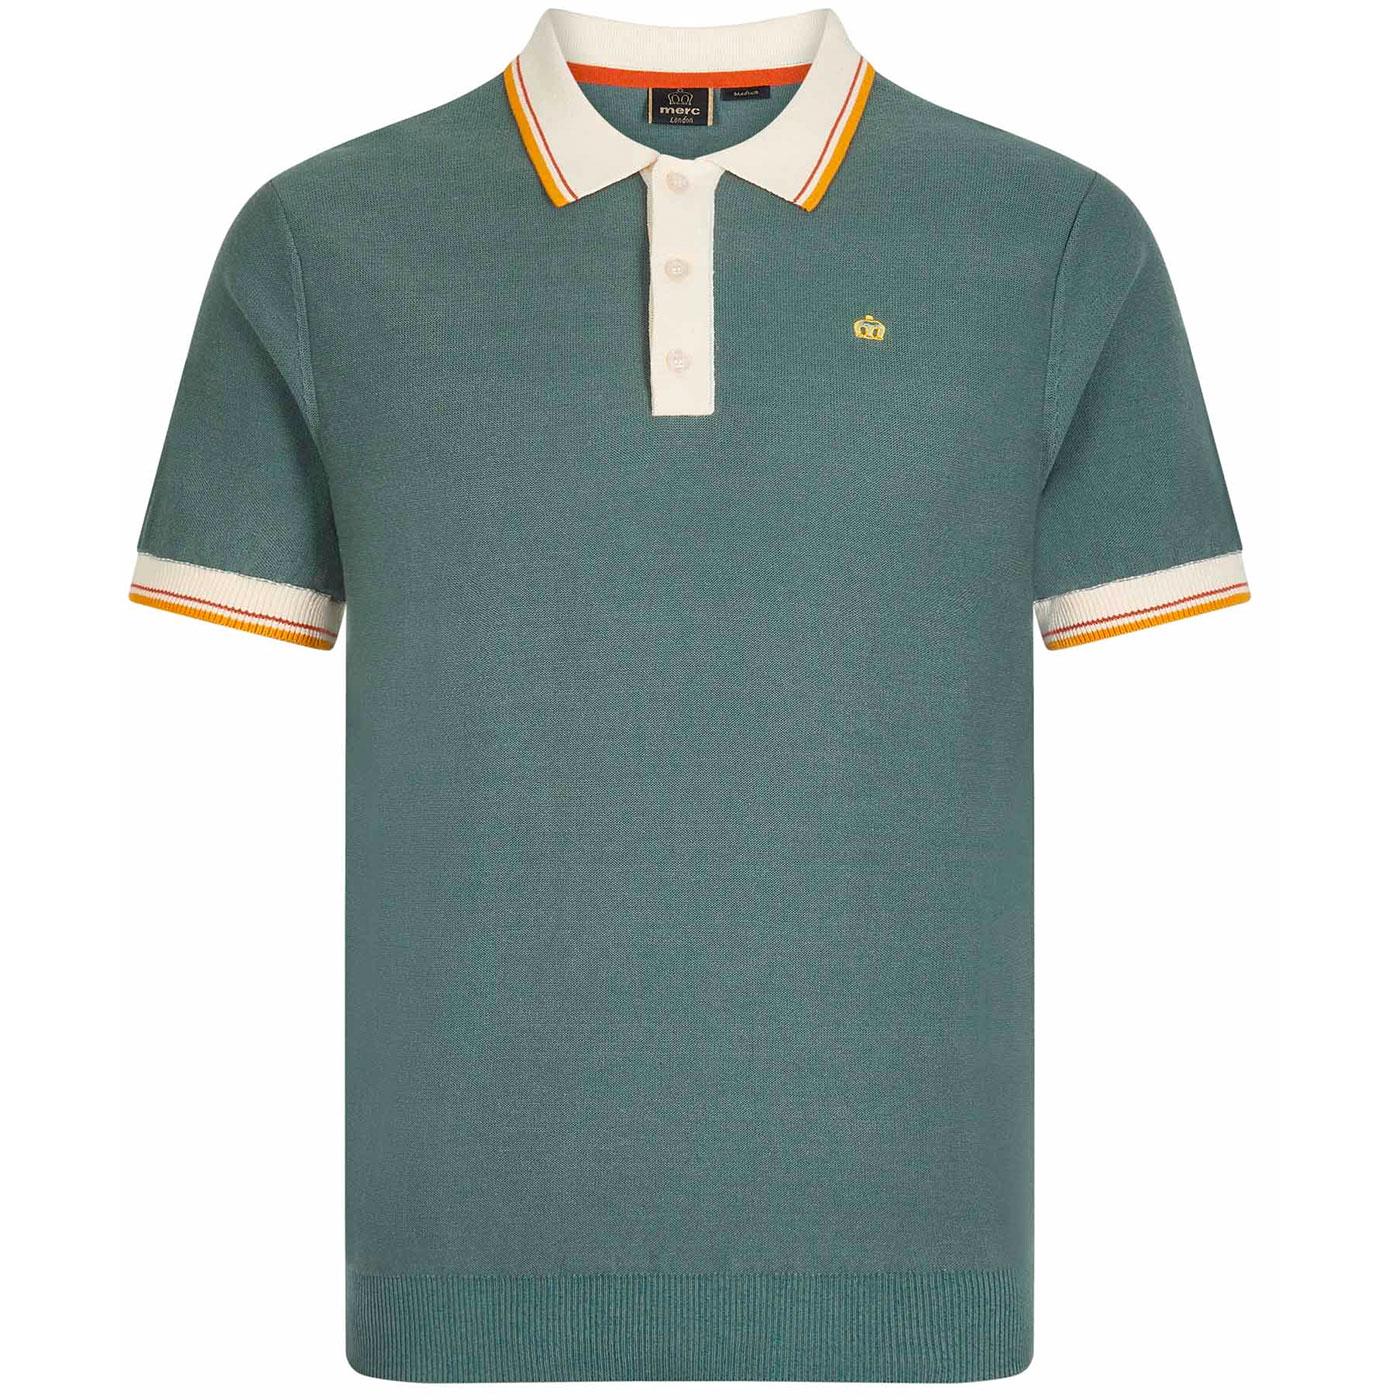 Anderson MERC Mod Contrast Collar Tipped Knit Polo Top Sage